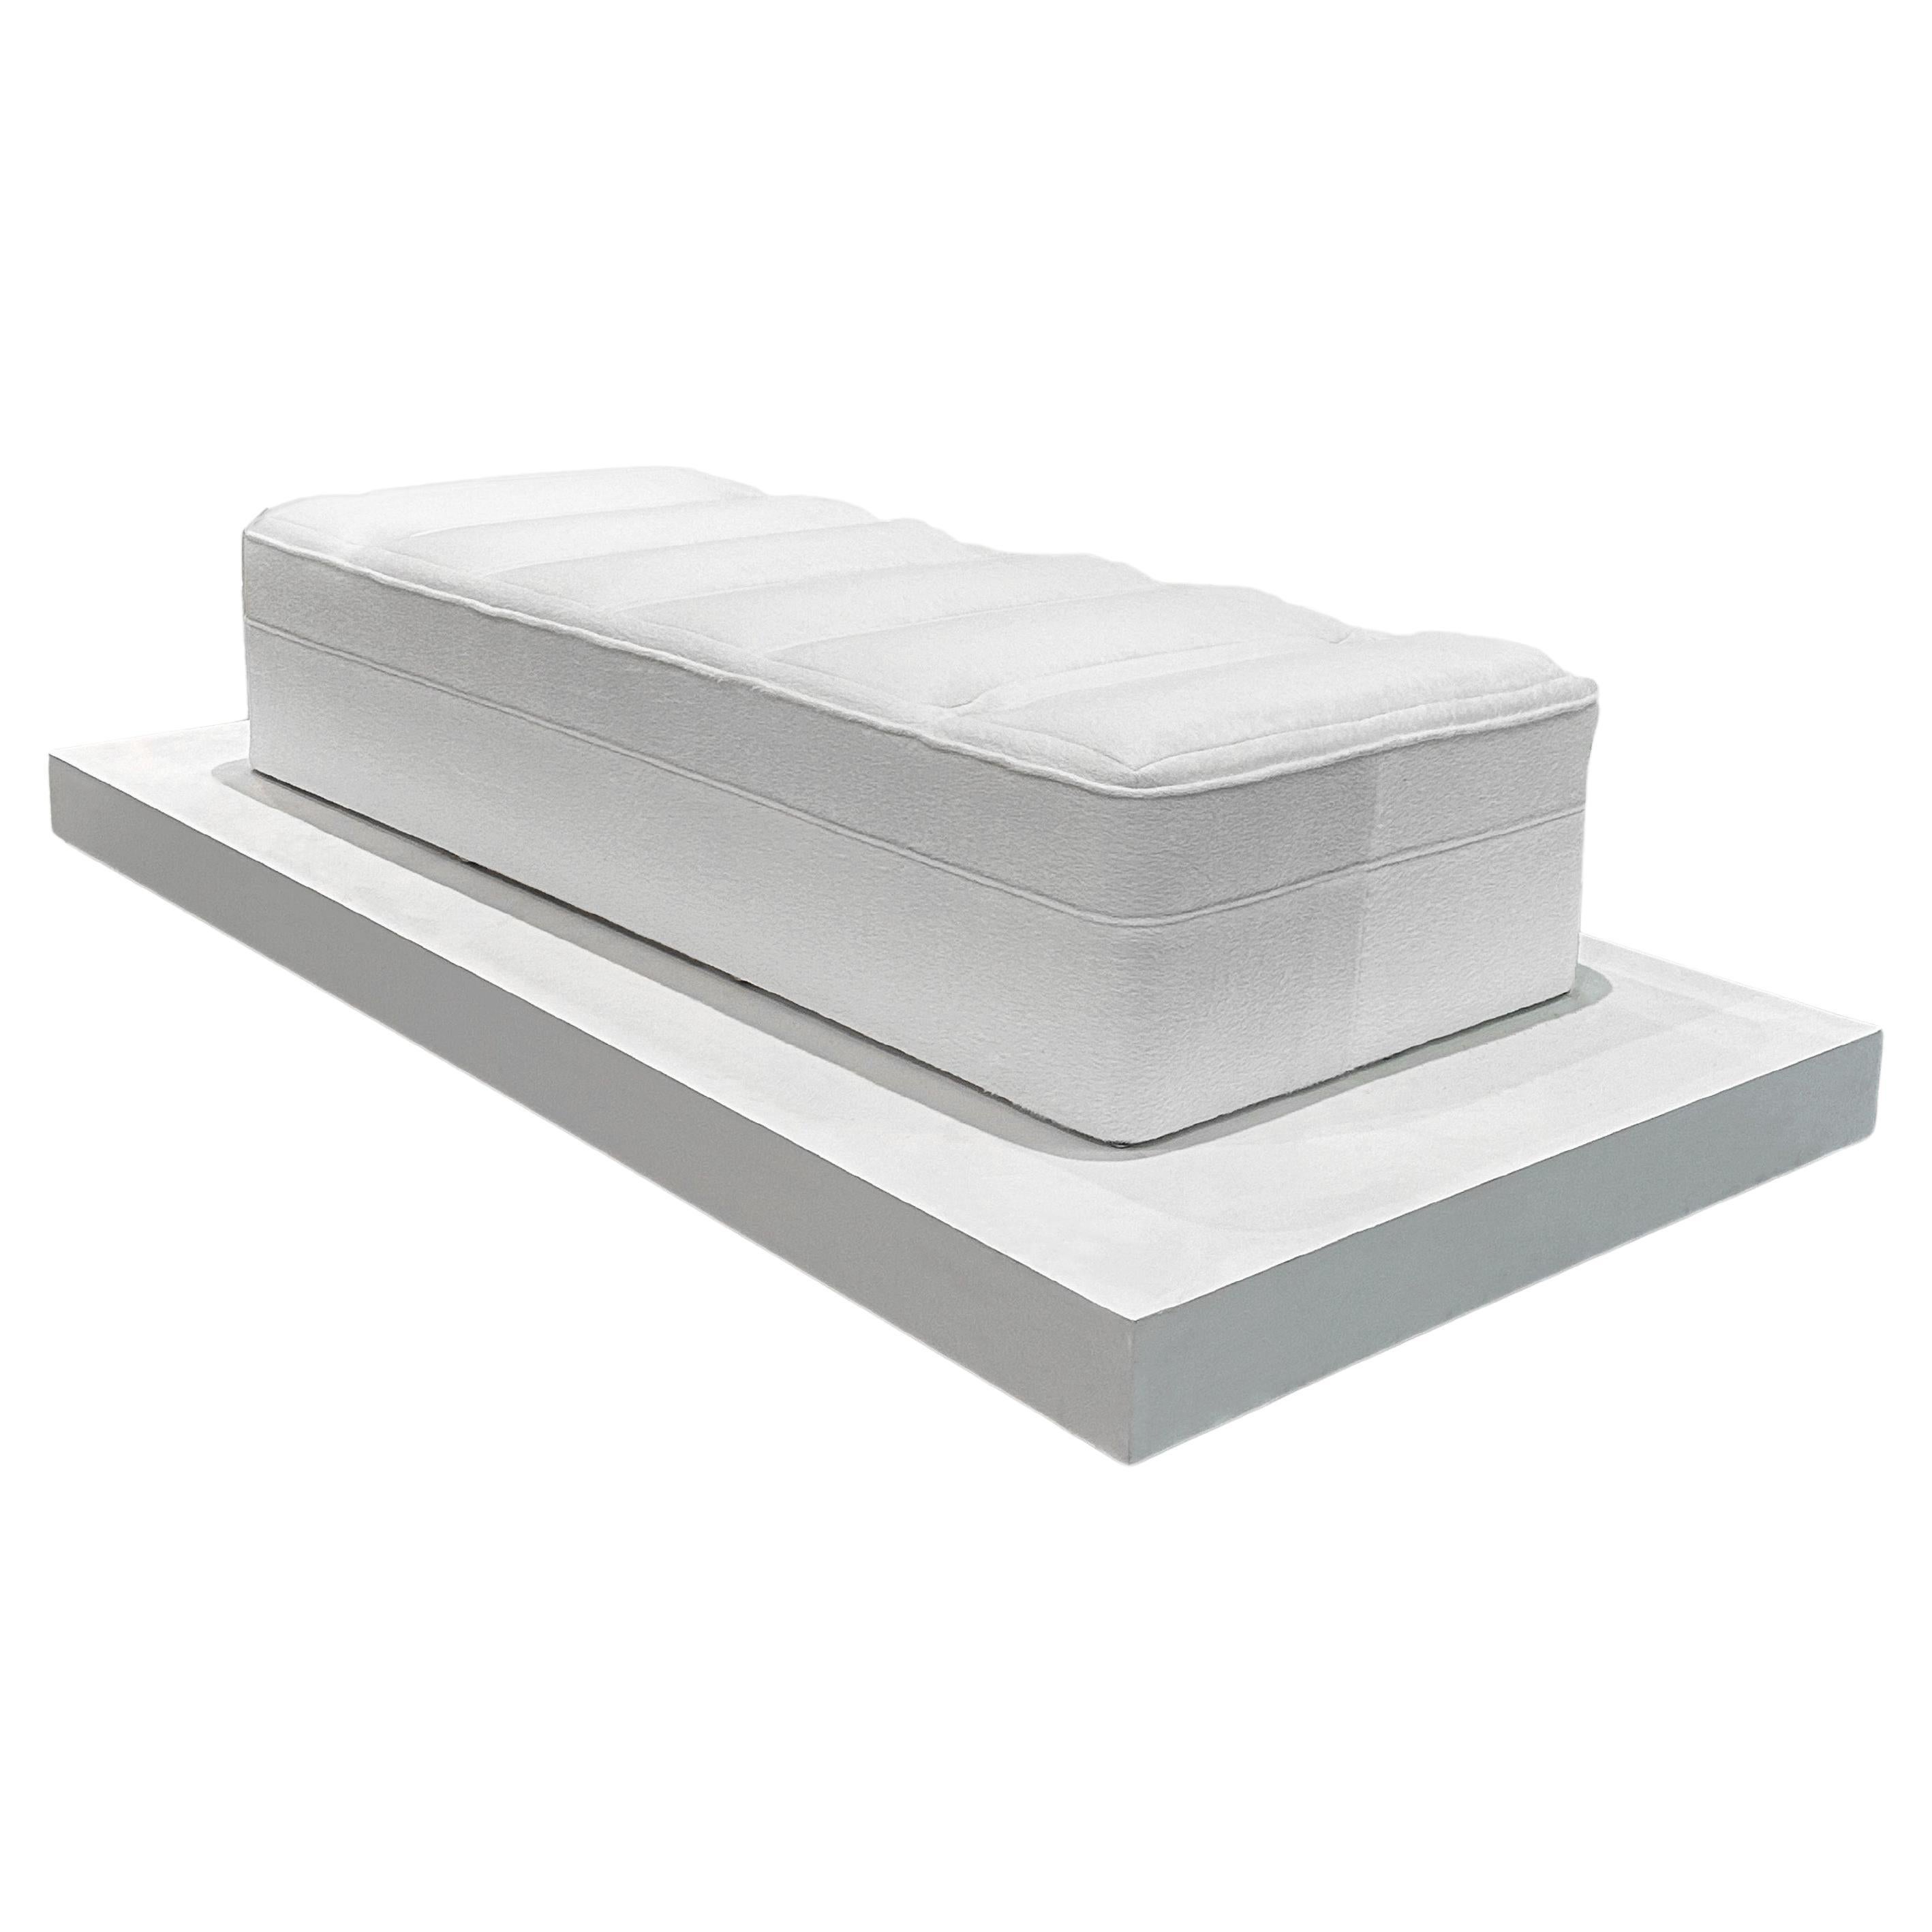 VIRGIL ABLOH X IKEA MARKERAD DAYBED COVER BEIGE - RvceShops